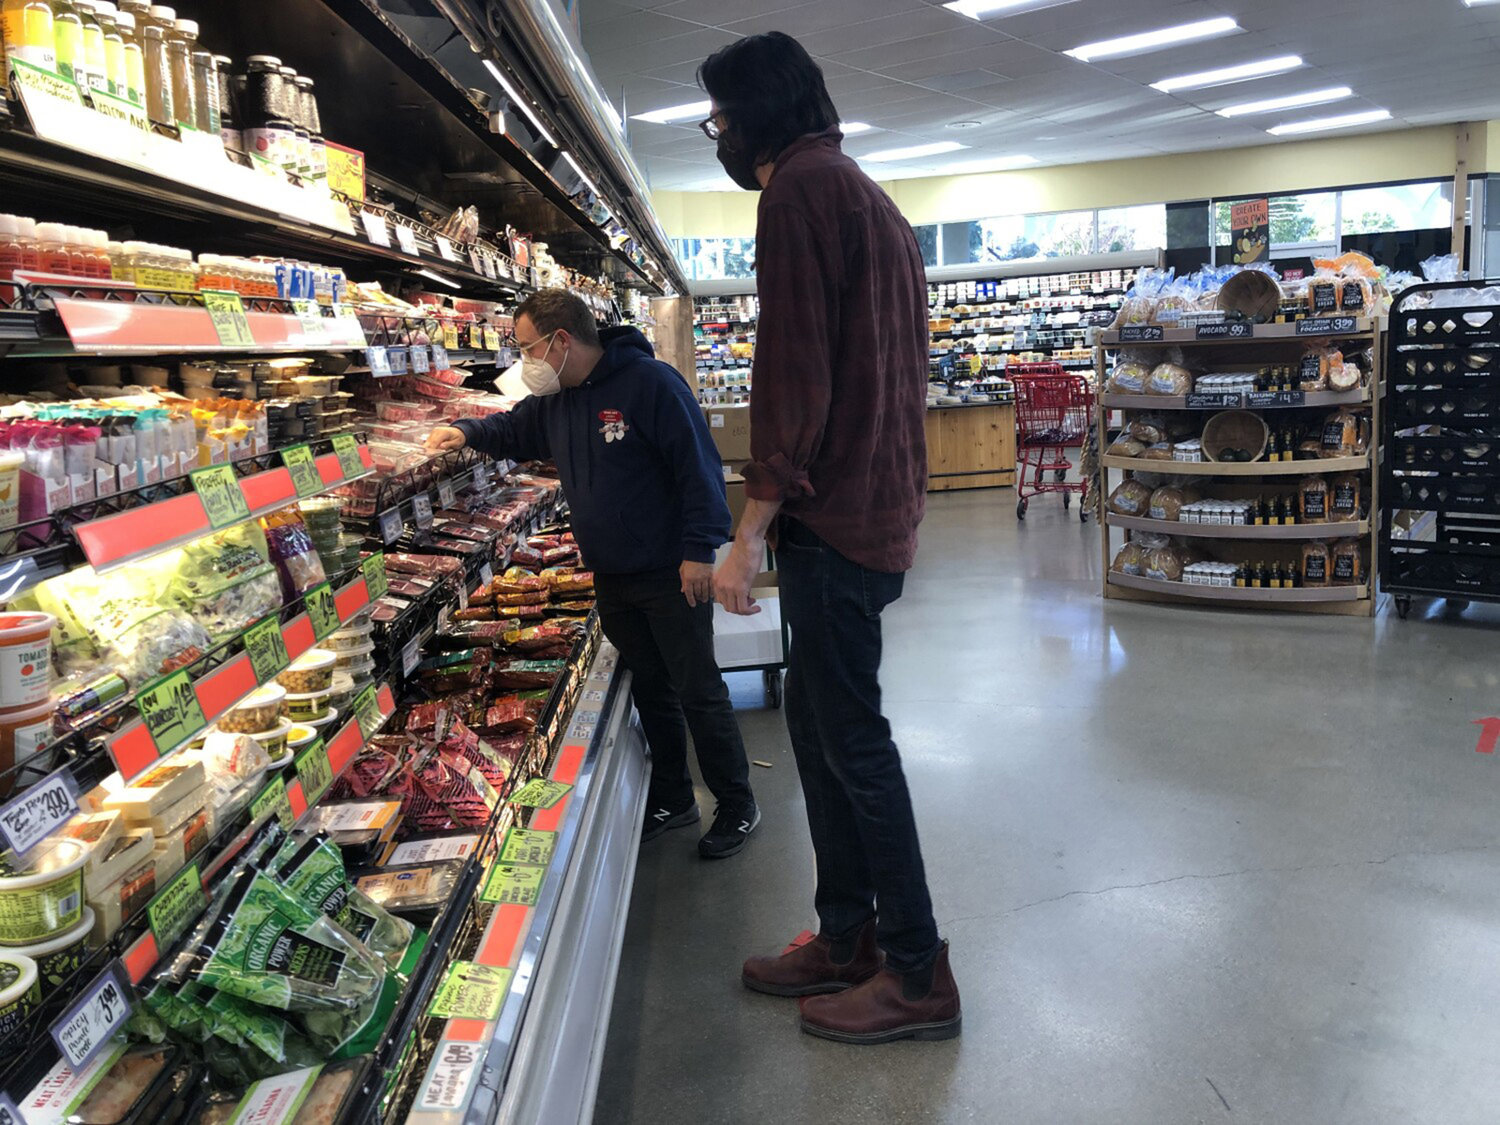 An employee assists Will Butler, 31, find the type of steak he wants at the grocery store in Silverlake on Thursday, Jan. 21, 2021, in Los Angeles, California. (Dania Maxwell/Los Angeles Times/TNS)